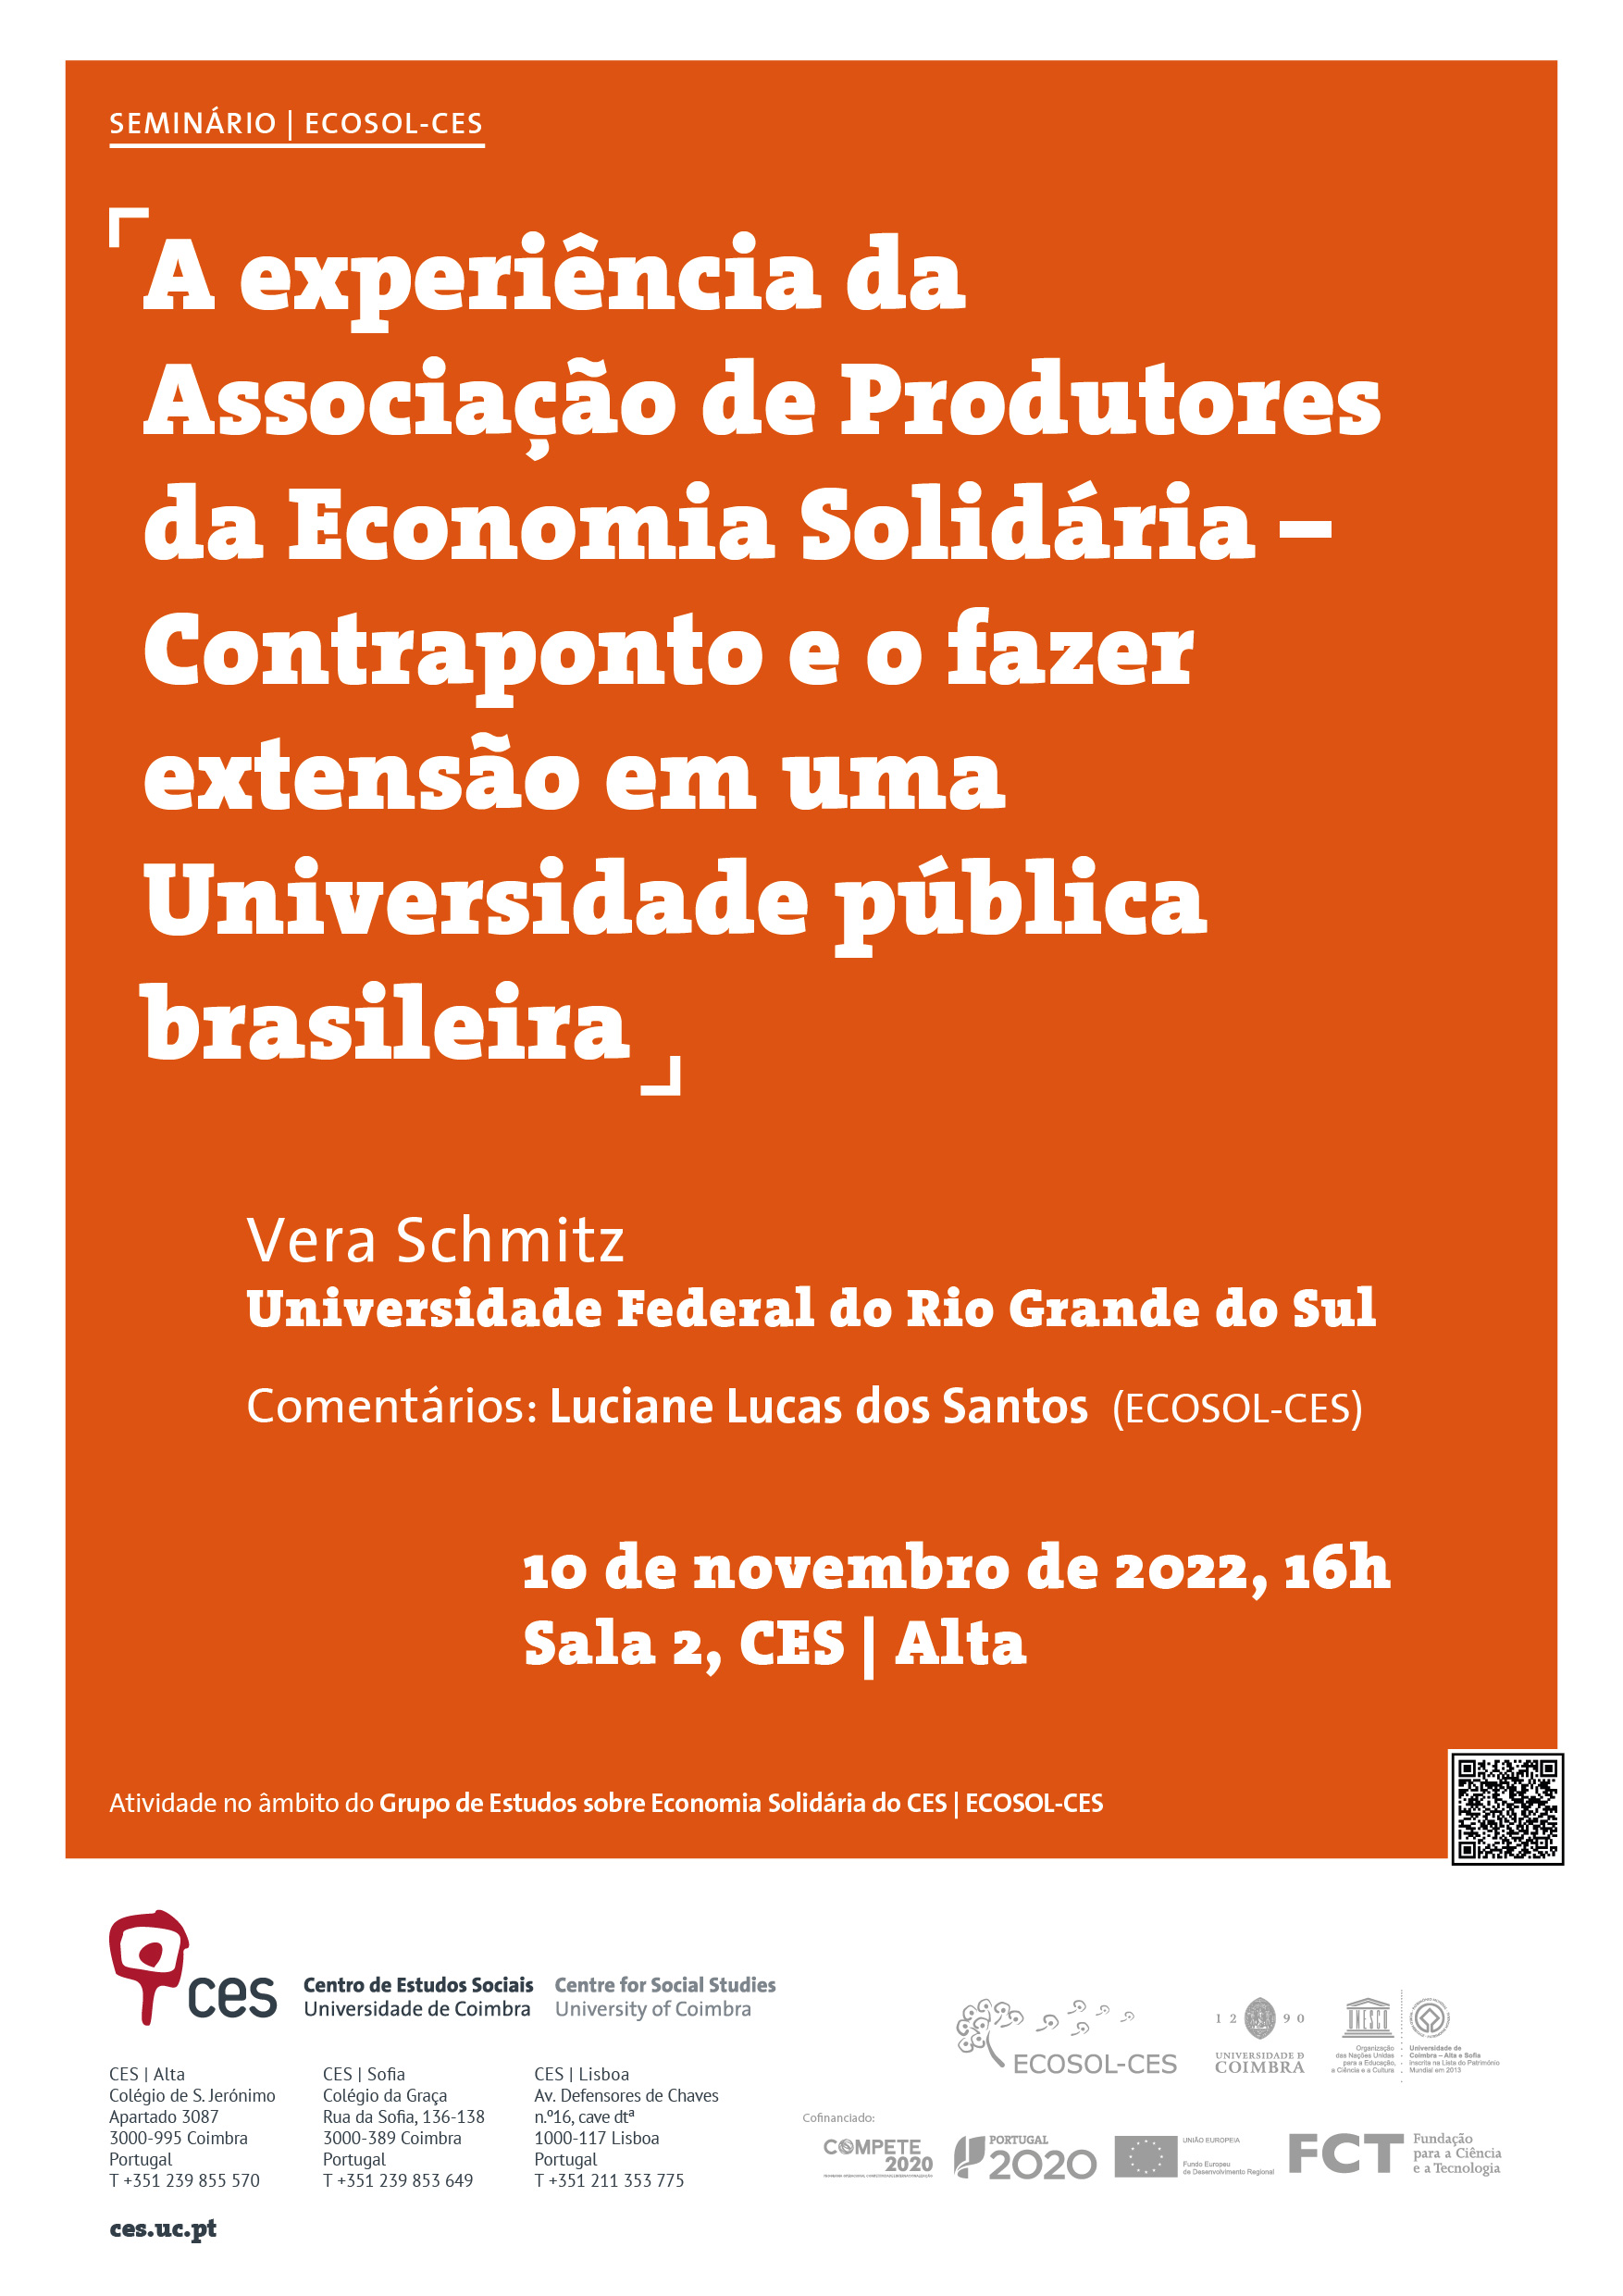 The experience of the Association of Solidarity Economy Producers - Contraponto and outreaching in a public Brazilian University<span id="edit_40756"><script>$(function() { $('#edit_40756').load( "/myces/user/editobj.php?tipo=evento&id=40756" ); });</script></span>